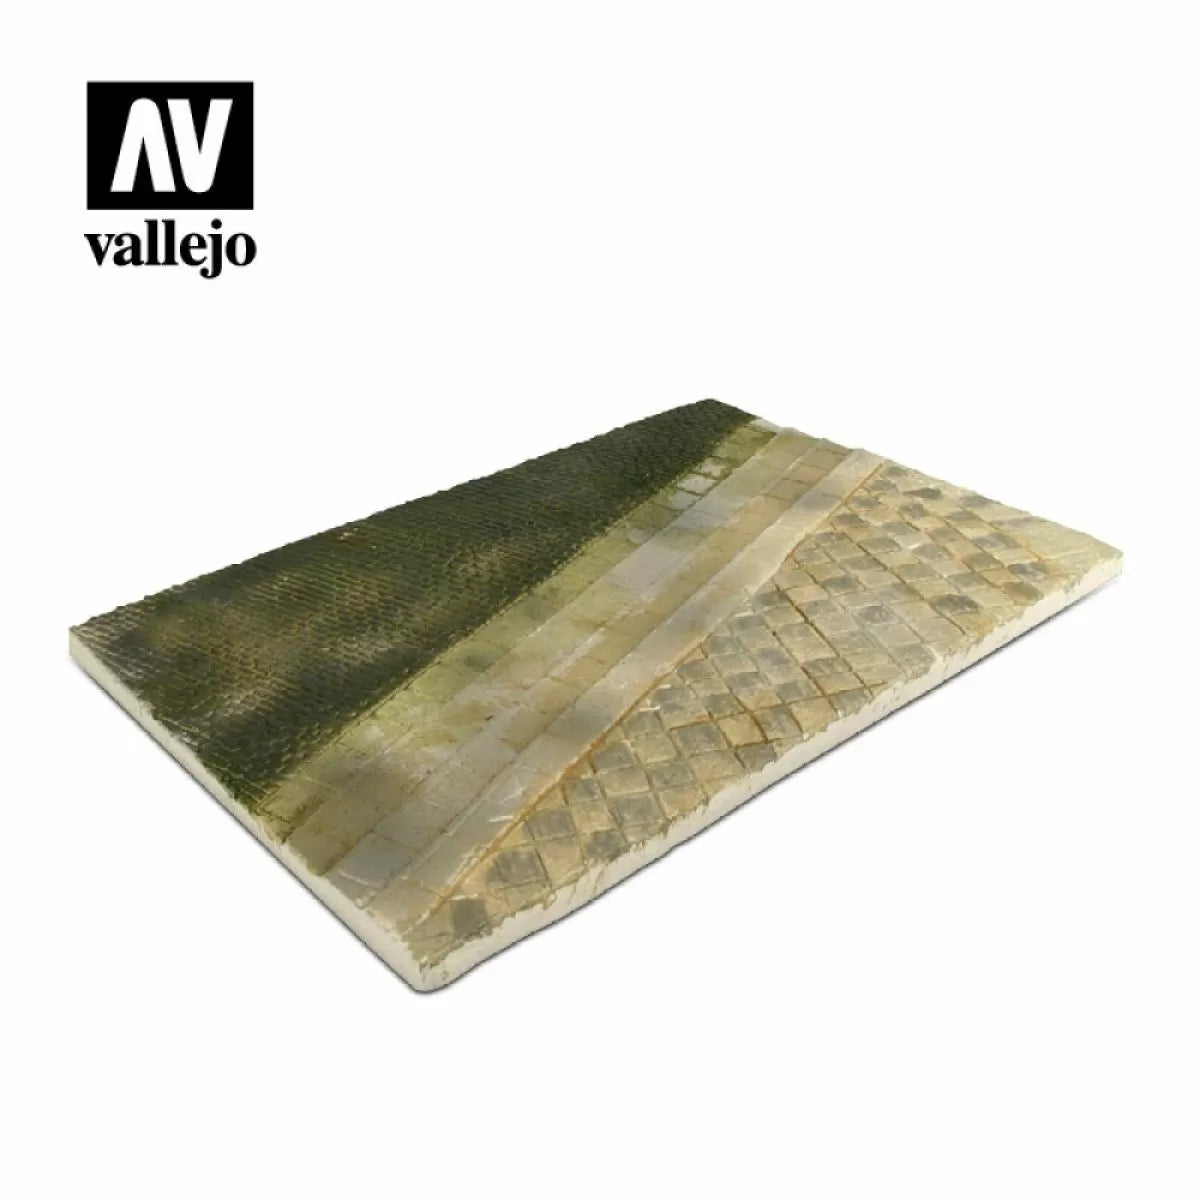 Vallejo Scenics Bases 1/35 - 31x21 Paved Street Section Diorama Base